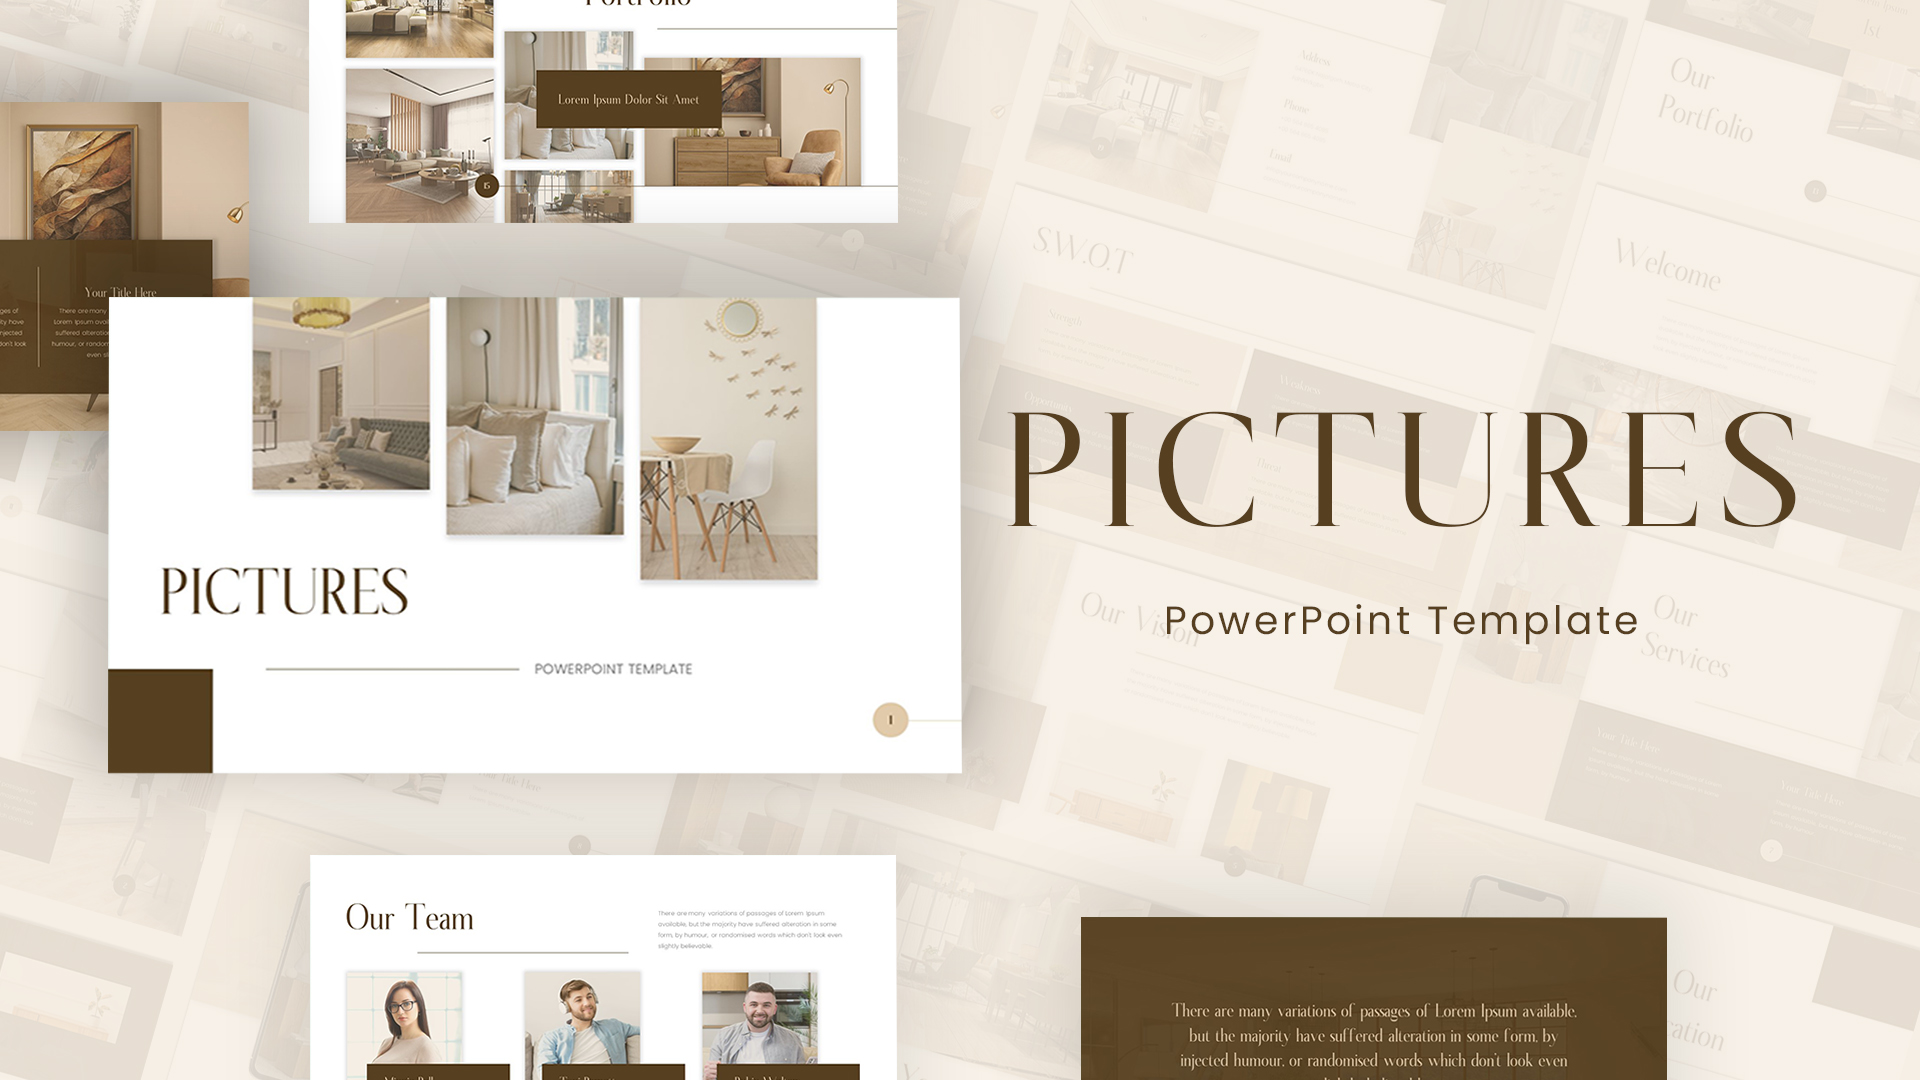 PowerPoint Templates With Pictures